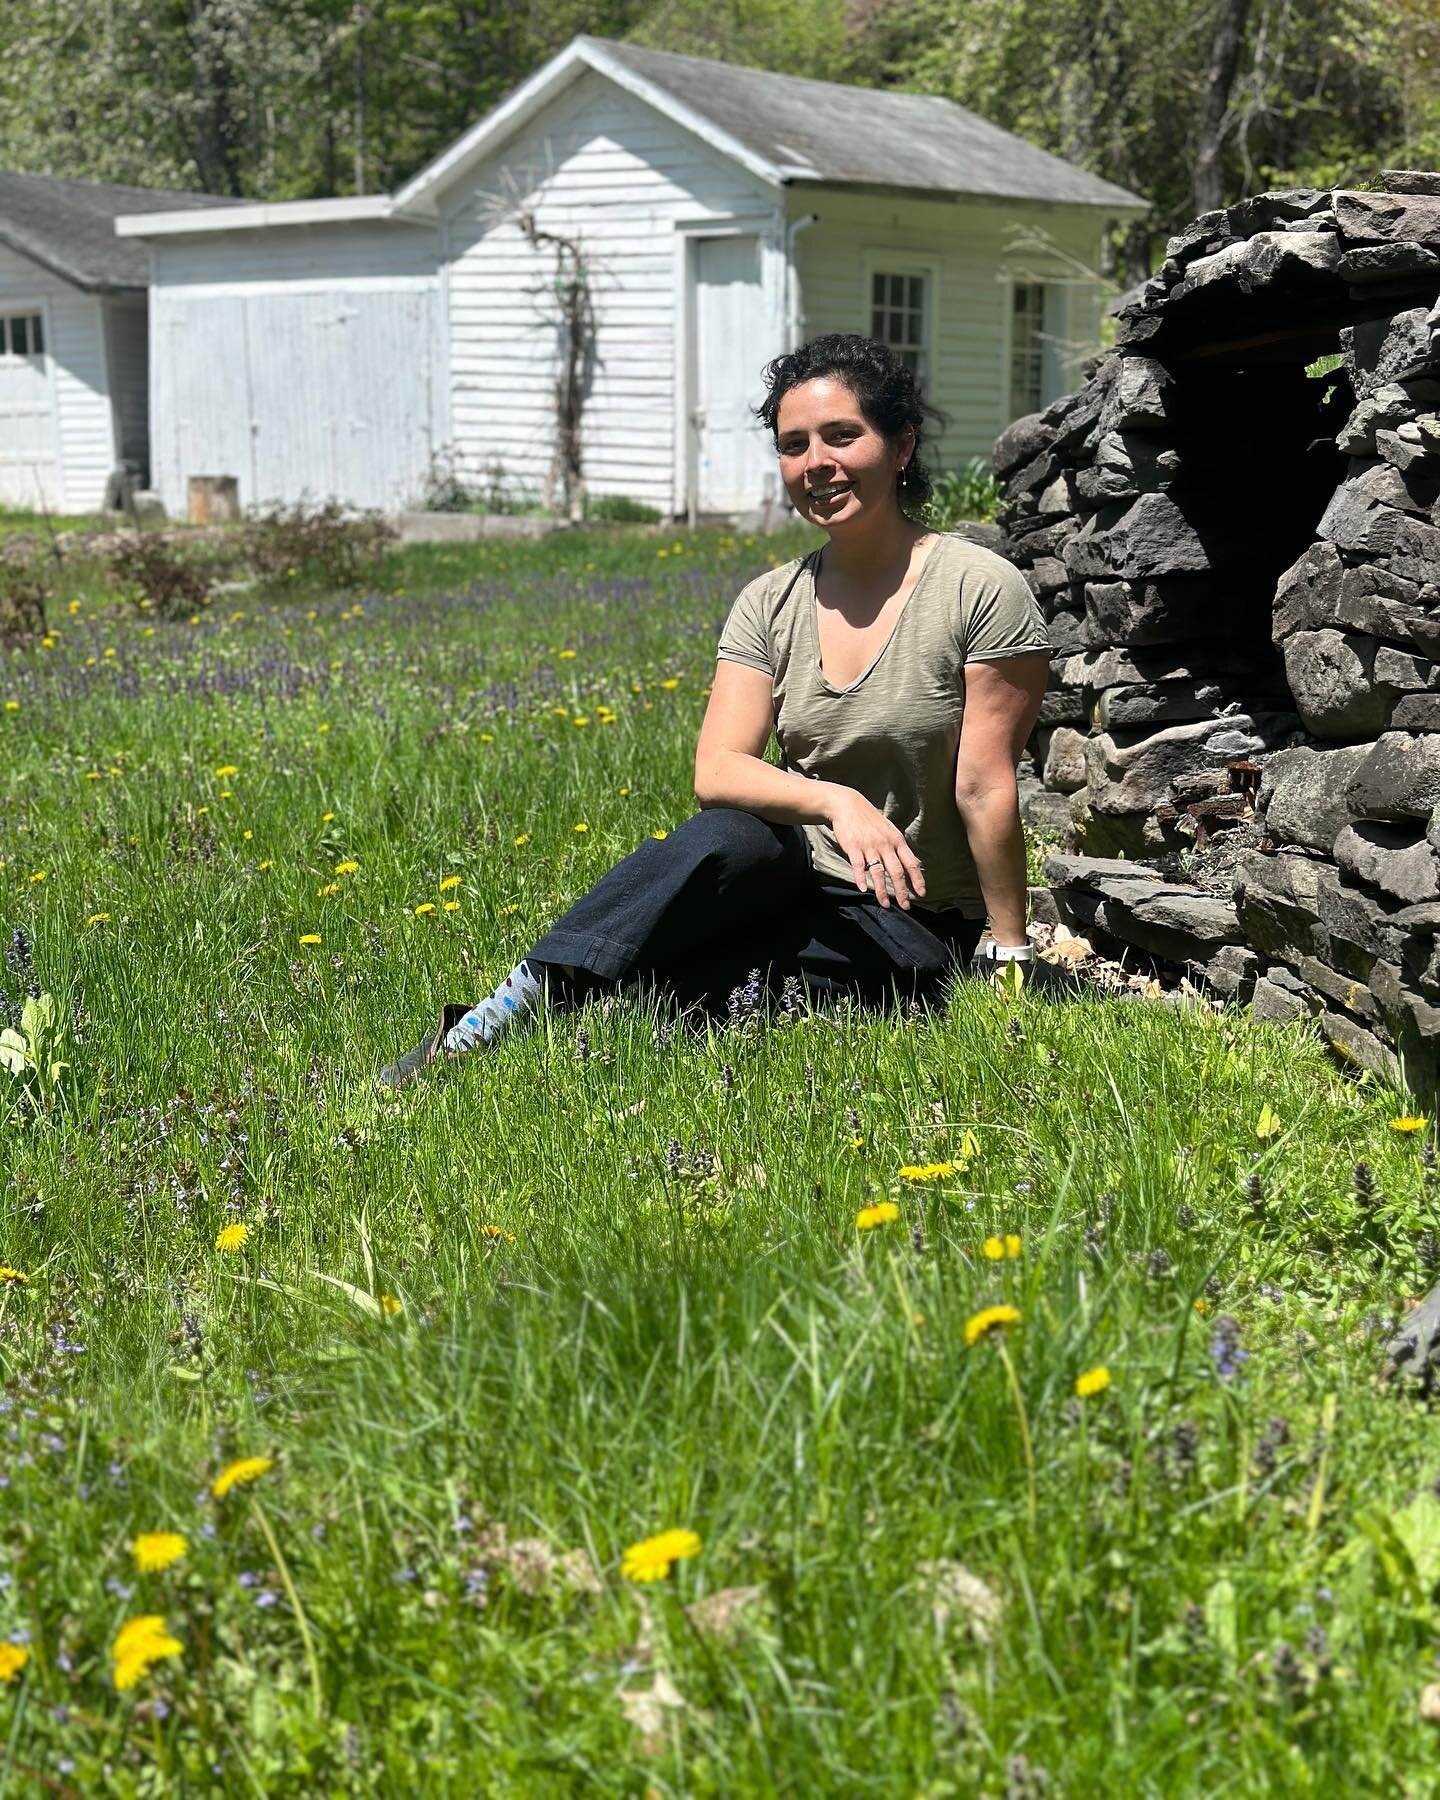 Upstate portrait on my dream lawn full of dandelion, clover, wild strawberry, chives and more! To think everyone&rsquo;s lawn could look this good, feed the bees AND us with literally NO effort. It&rsquo;s wild y&rsquo;all.